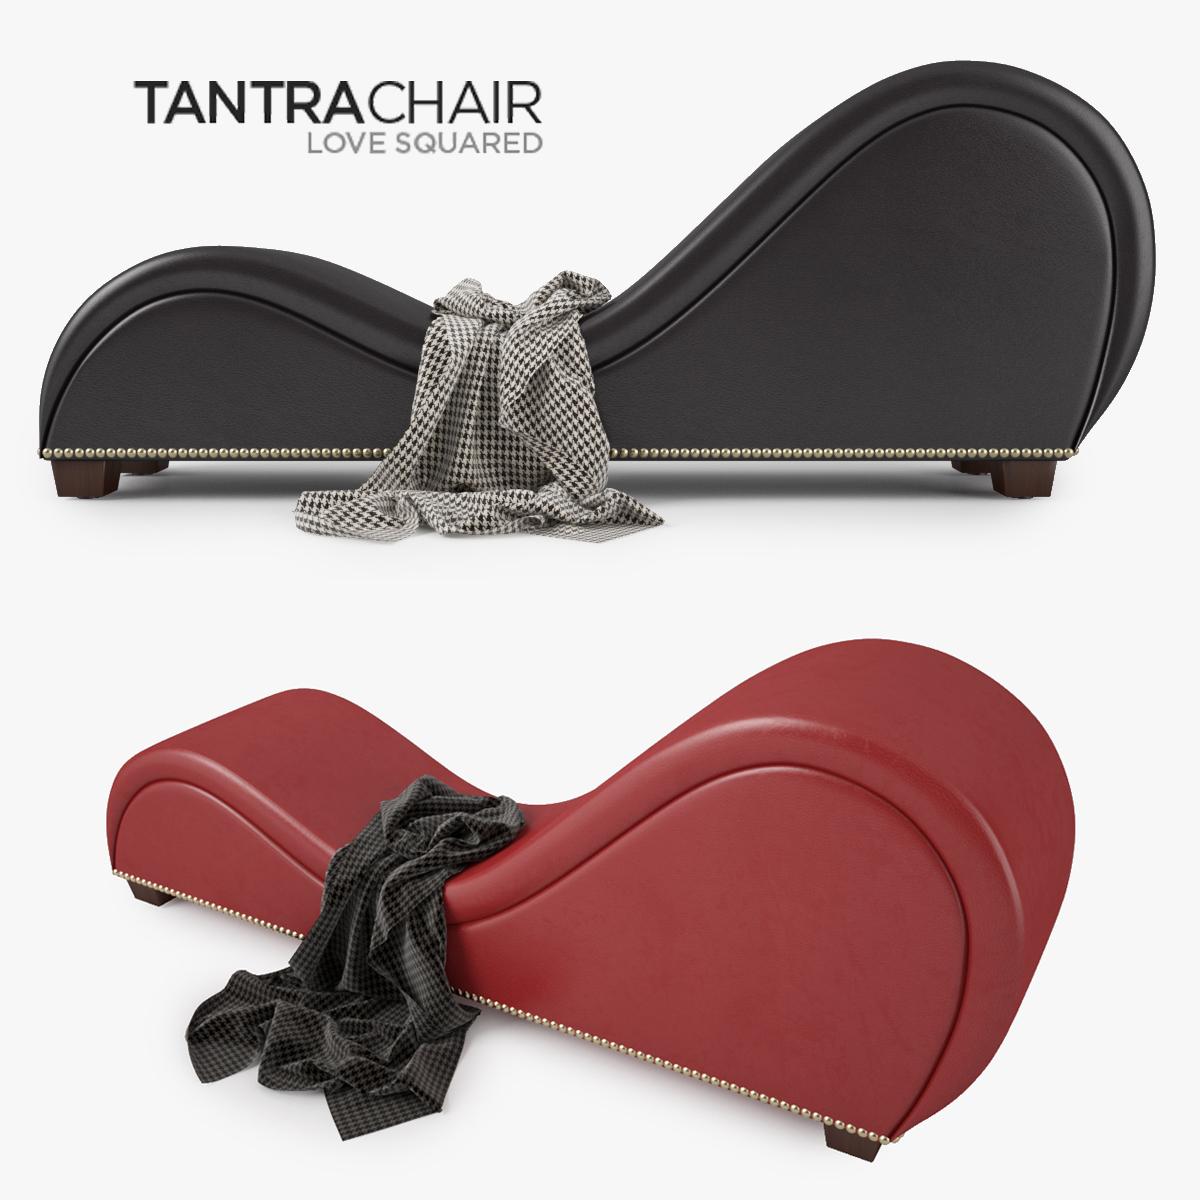 Facequad On Twitter 3d Model Tantra Chair Sexual Furniture